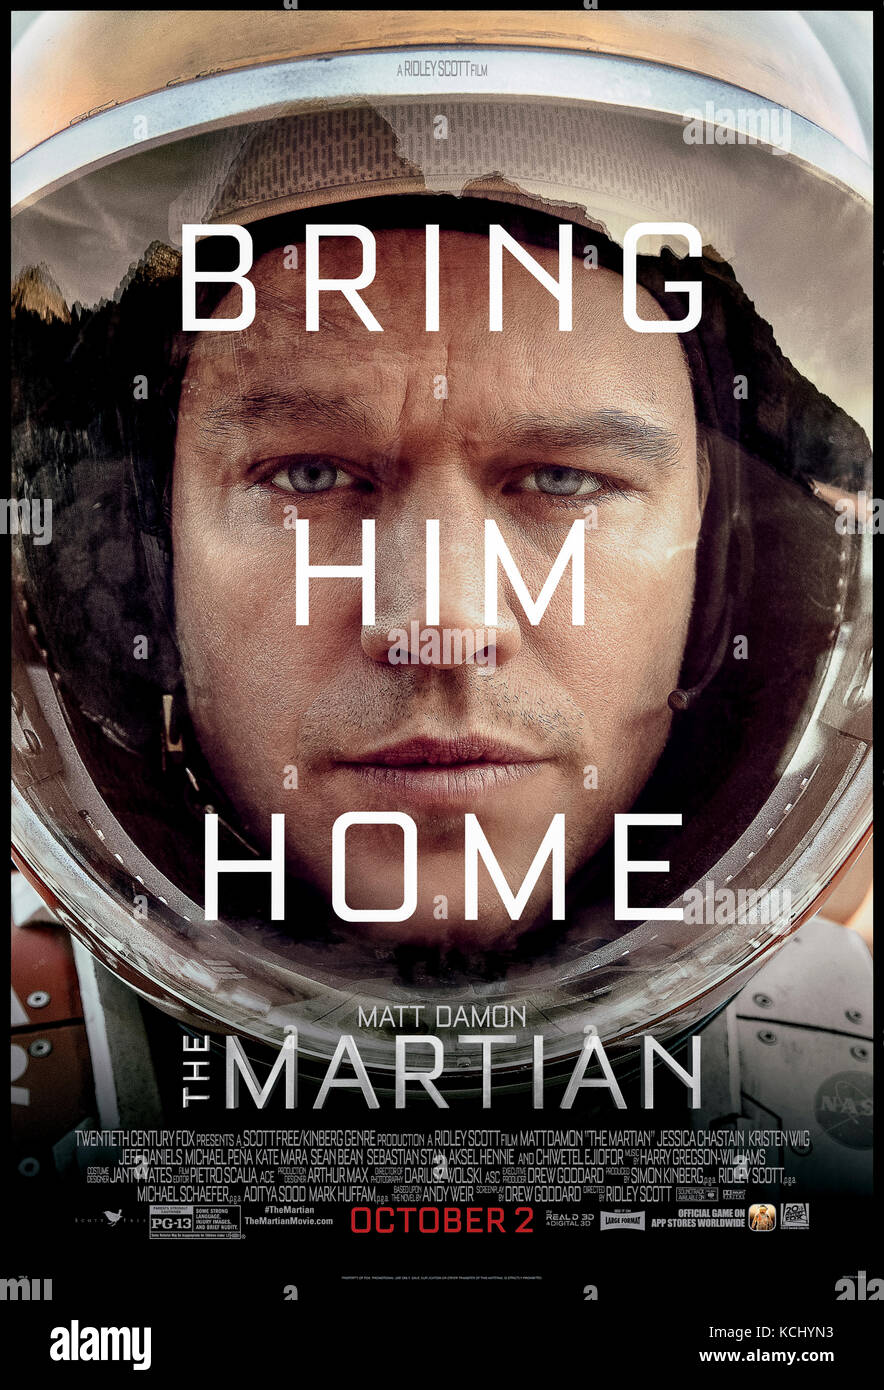 The Martian (2015) directed by Ridley Scott and starring Matt Damon, Jessica Chastain and Kristen Wiig. An astronaut stranded on Mars and assumed dead must survive and signal Earth with limited resources. Stock Photo